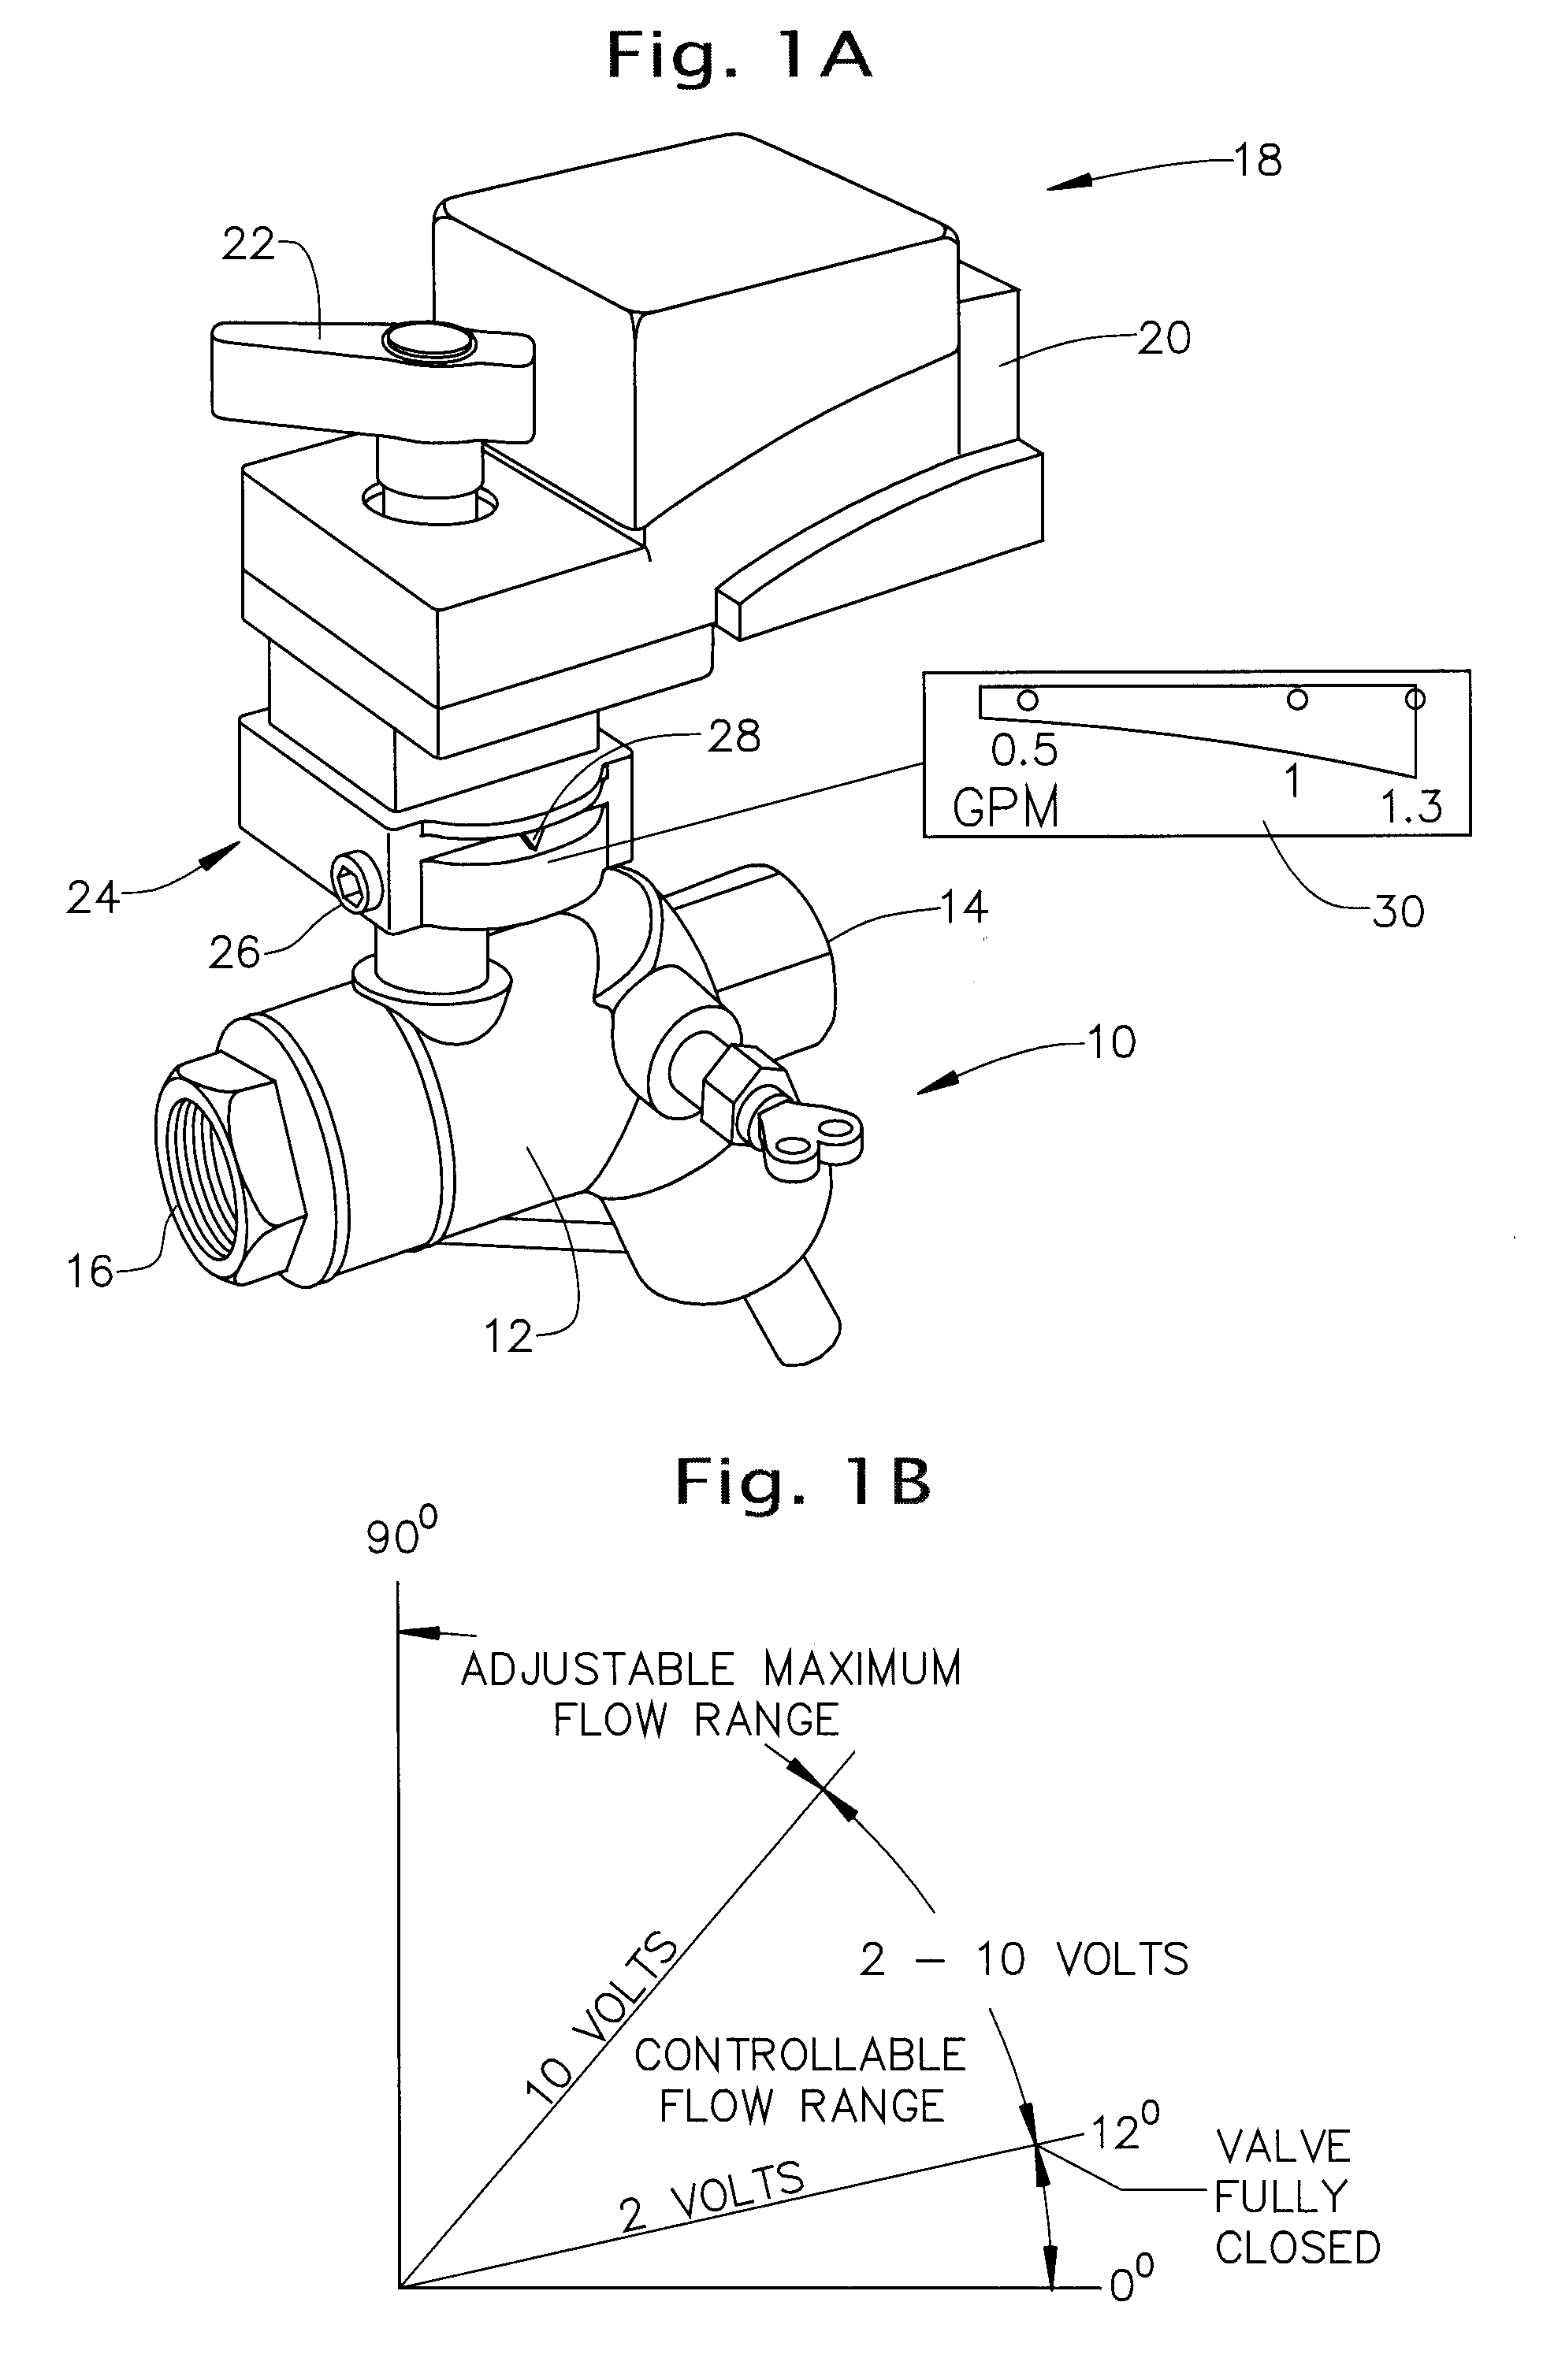 A field adjustable control valve assembly and field adjustment module